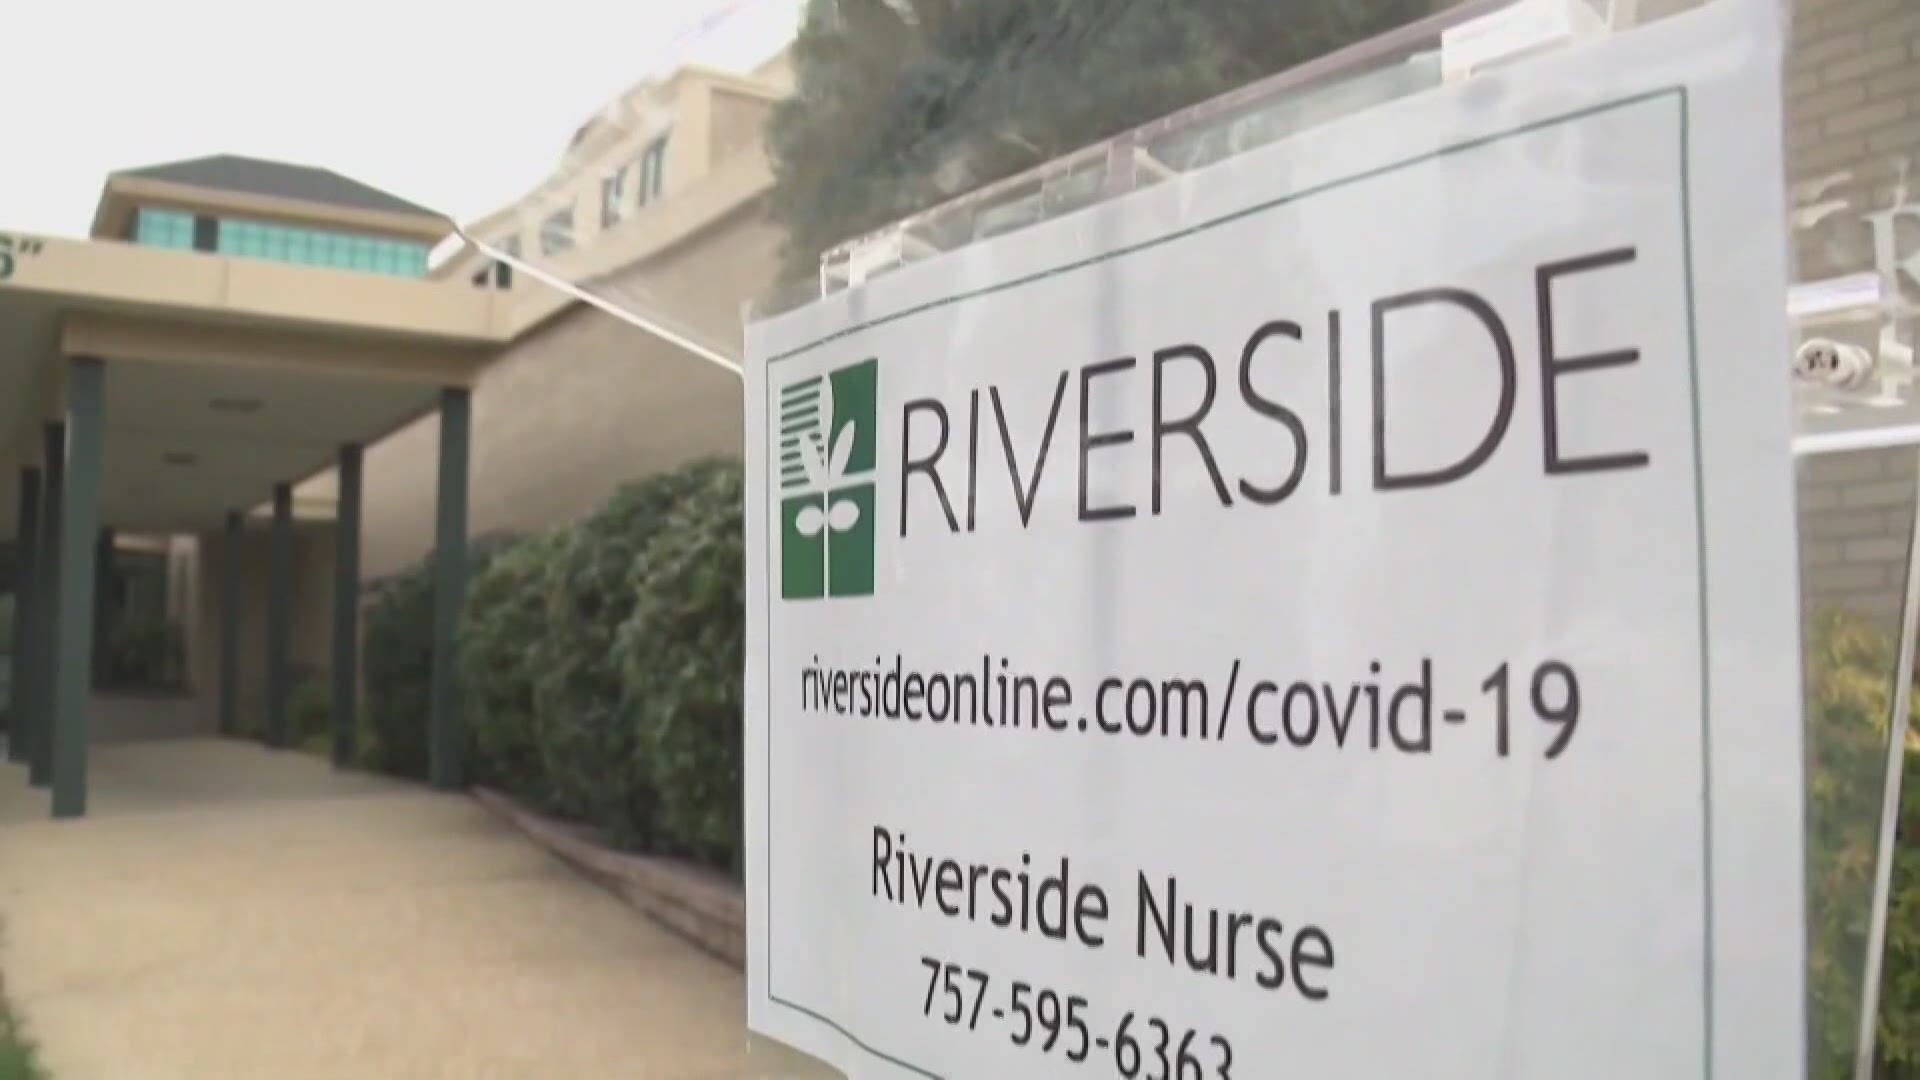 Riverside Health System’s Vice President and Chief Pharmacy Officer Cindy Williams, said vaccine supplies are better and her team is preparing for the next phase.